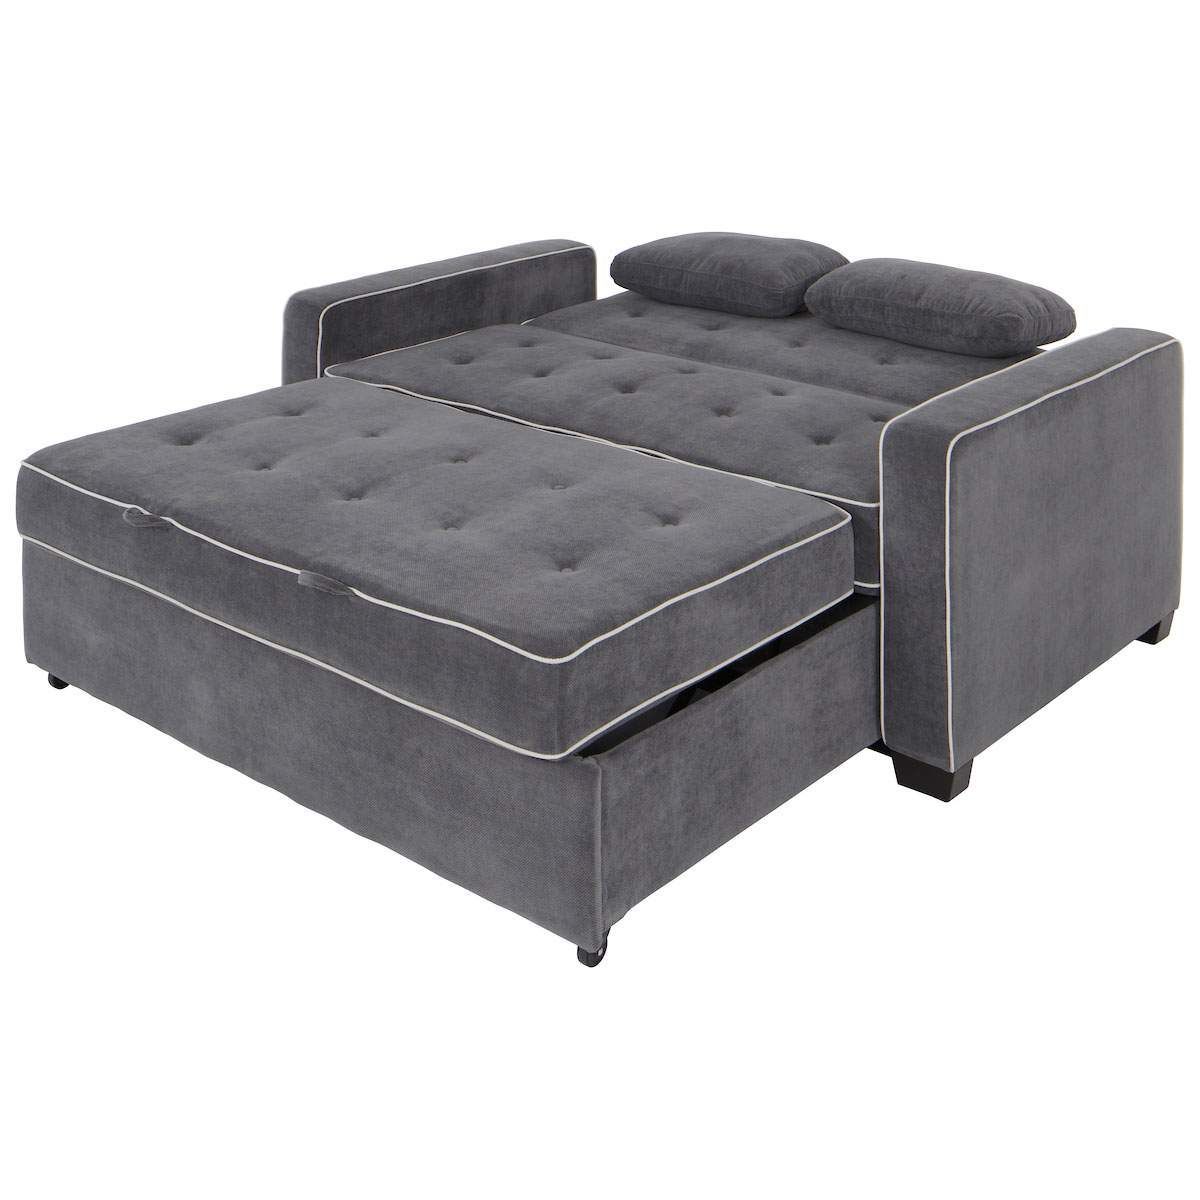 Supreme Pull Out Sofa Bed Fold Away Couch Within 2 In 1 Gray Pull Out Sofa Beds (View 16 of 20)